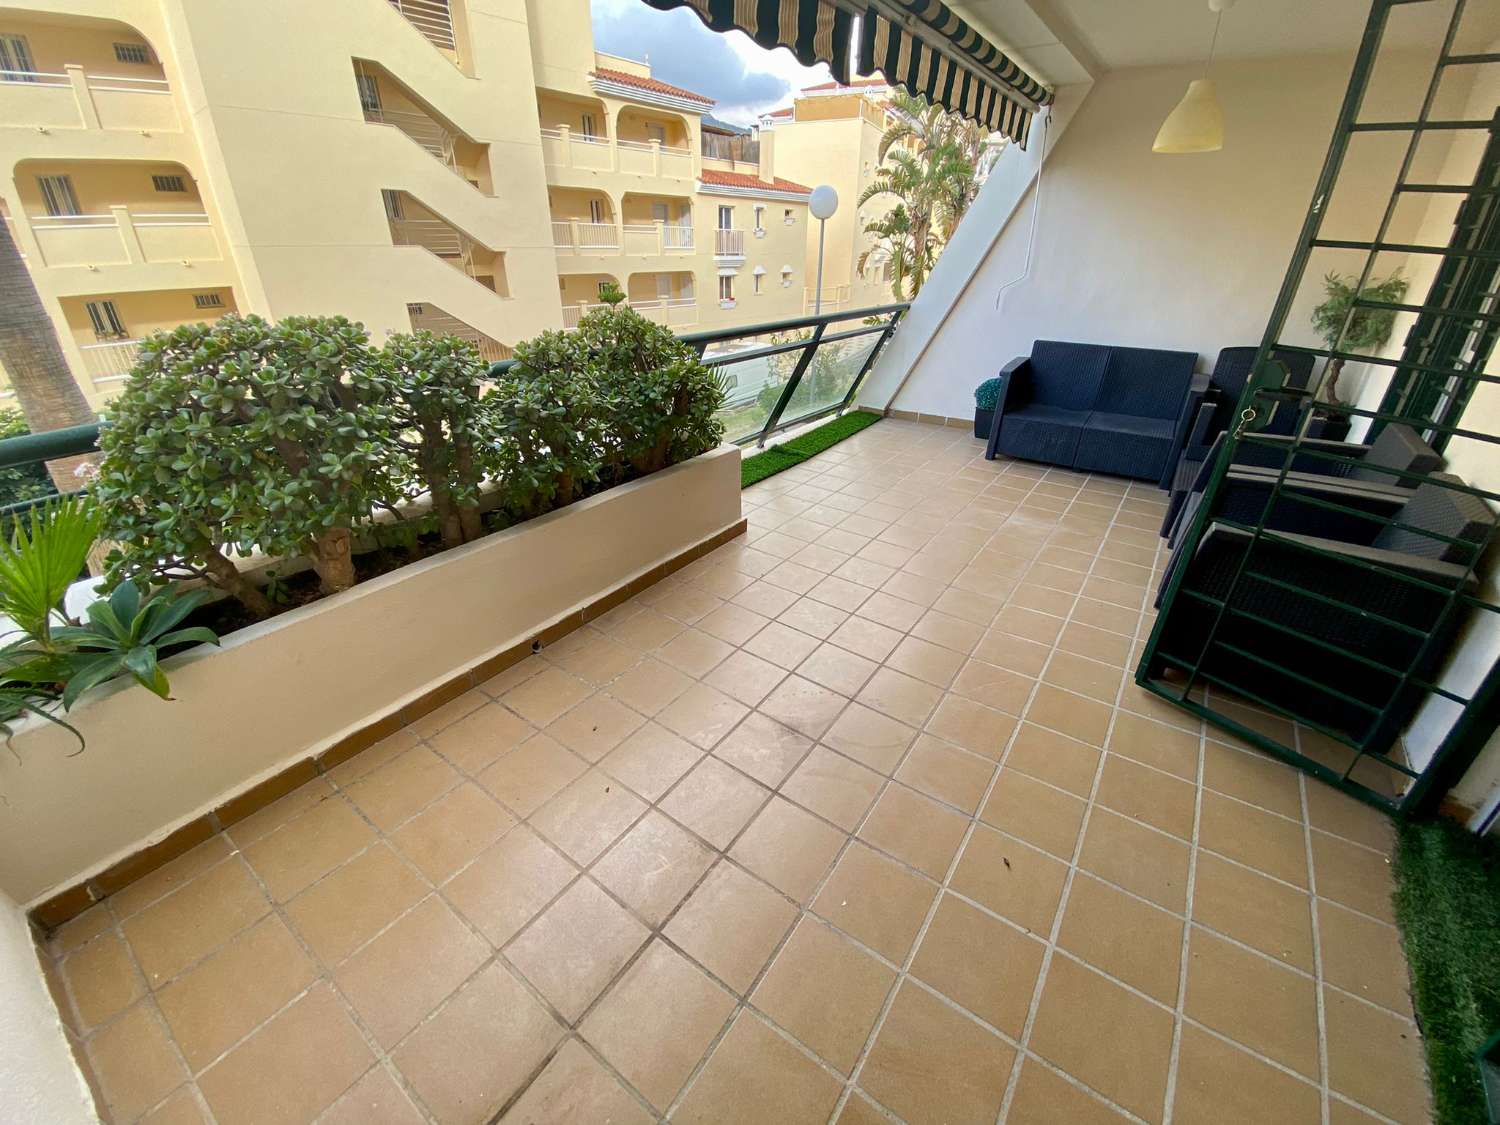 IT'S NOT LONG SEASON! ON RENT FROM 26/9/2023 - 31/5/2024 NICE APARTMENT IN BENALMÁDENA